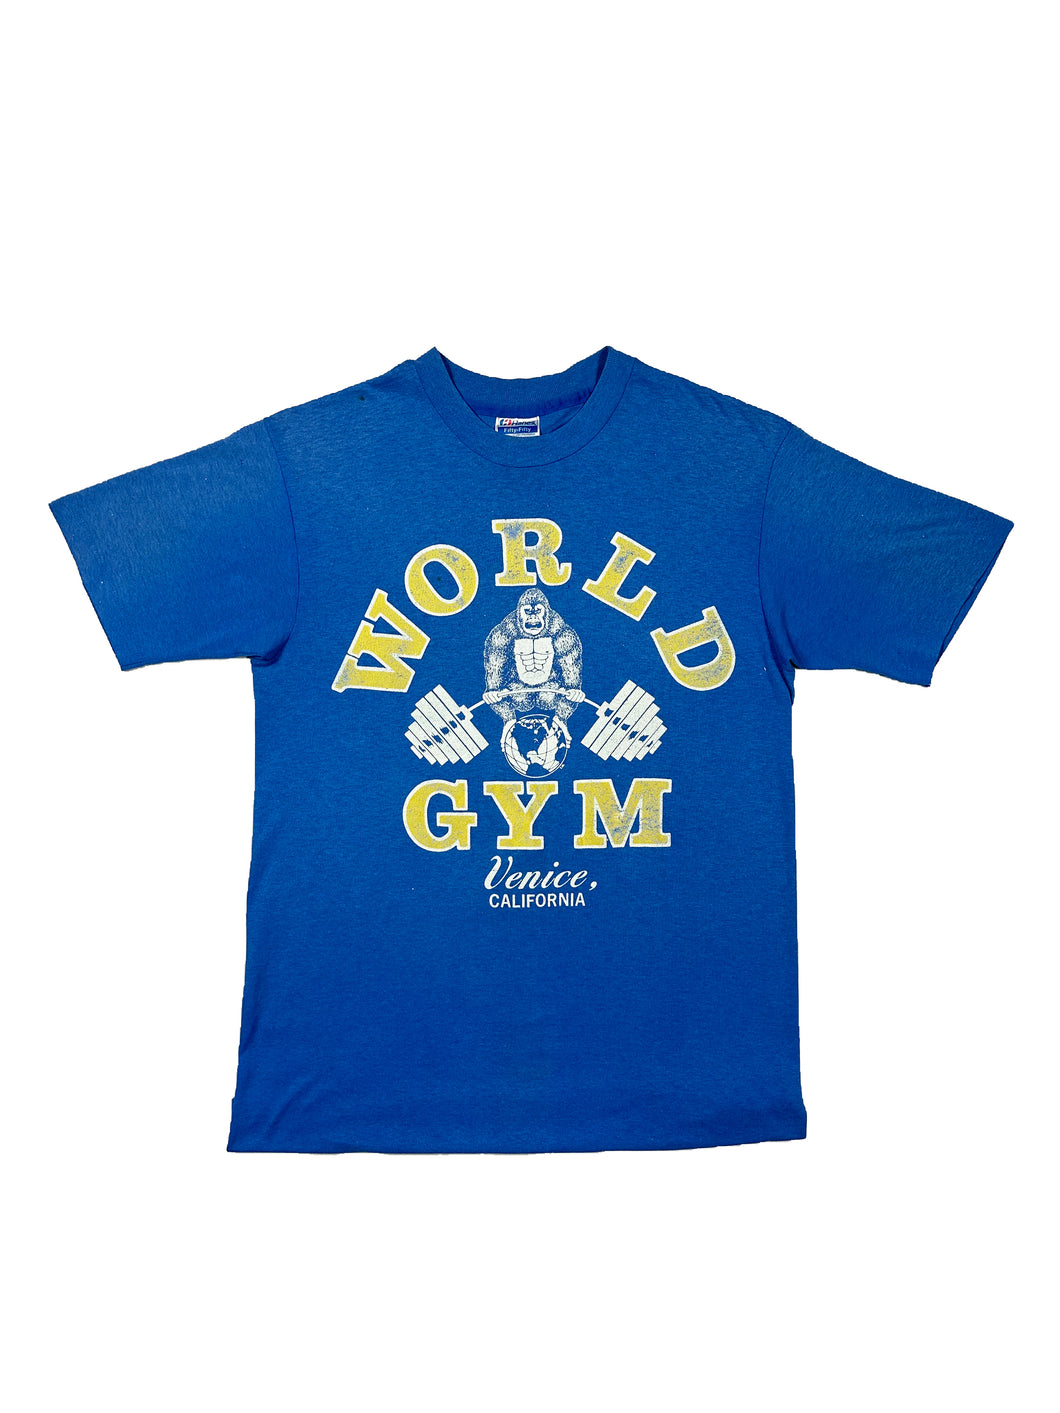 VINTAGE WORLD GYM T SHIRT SIZE SMALL